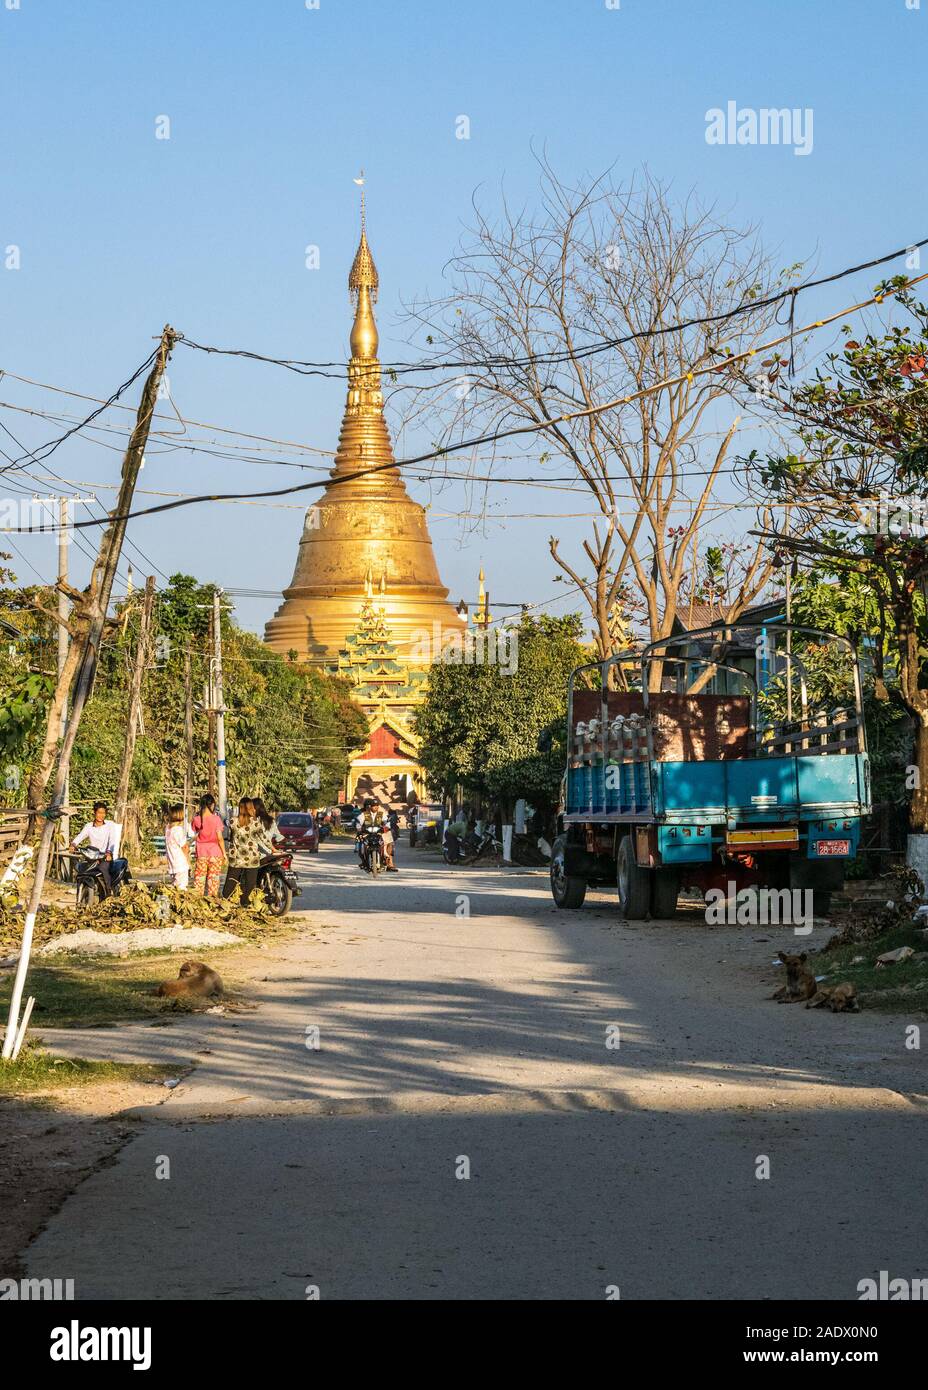 Local people going about their everyday life in a  small burmese town of Taungoo, Myanmar with the famous Swesandaw pagoda in the background. Stock Photo